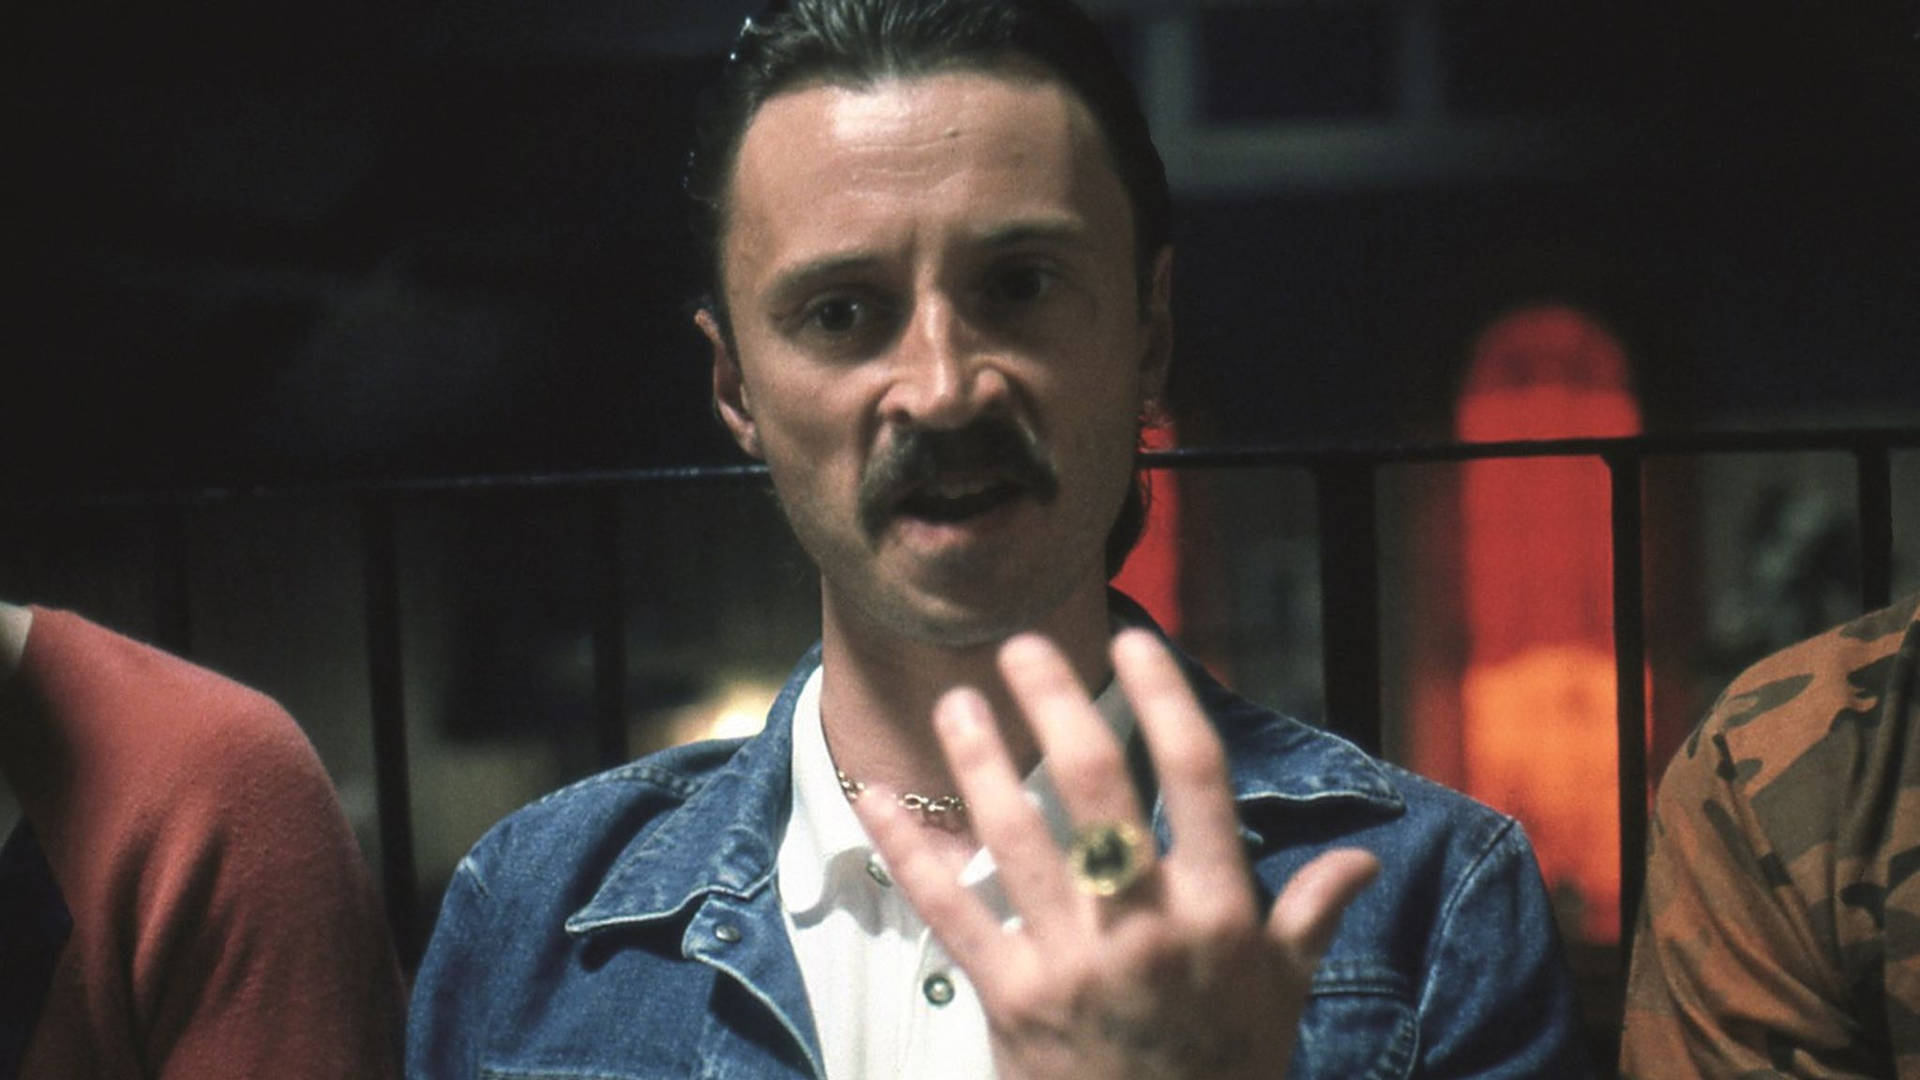 Robertcarlyle Som Begbie. (note: This Is A Direct Translation, But In A Computer/mobile Wallpaper Context It May Be Common To Use A Tagline Or Caption In Swedish Such As 